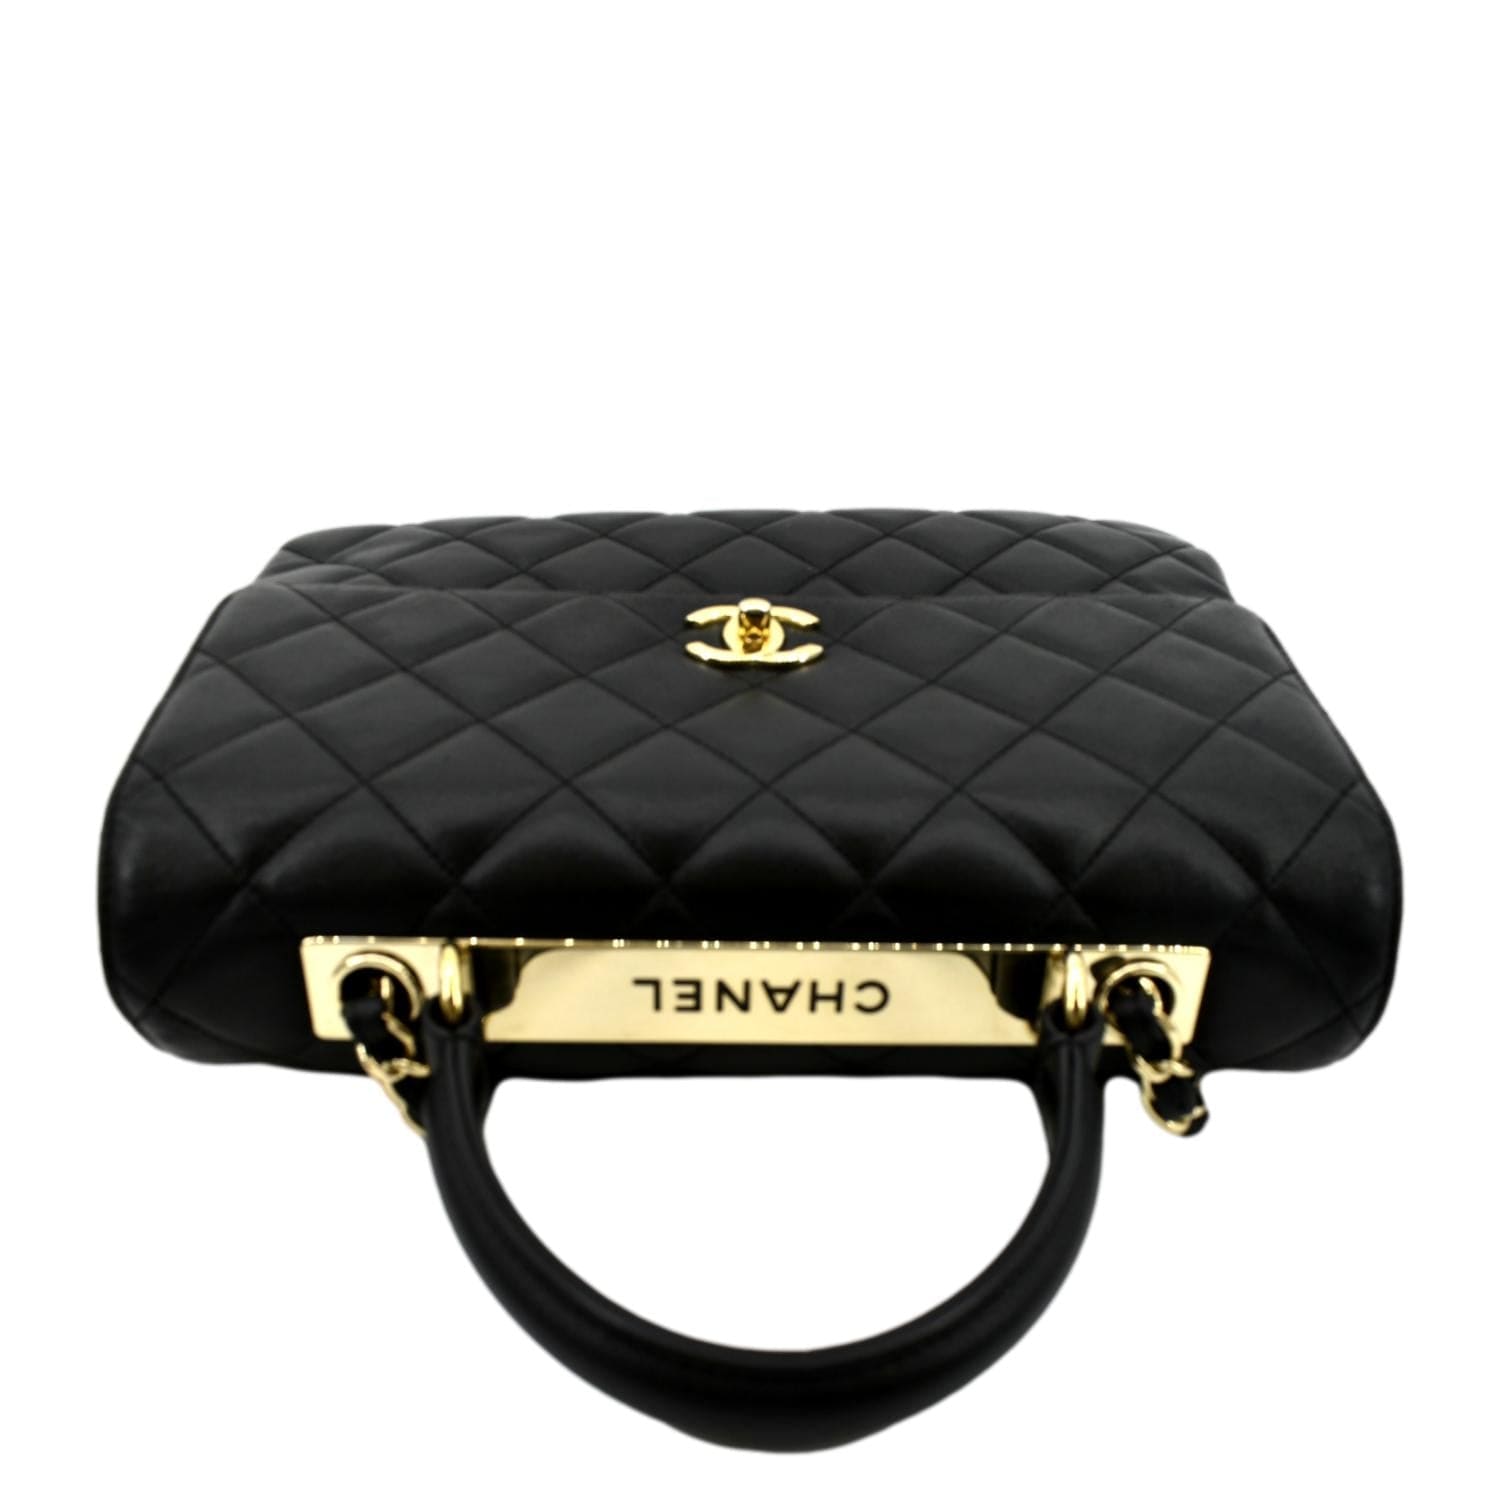 CHANEL Small Trendy CC Flap Bag with Top Handle in Black Lambskin